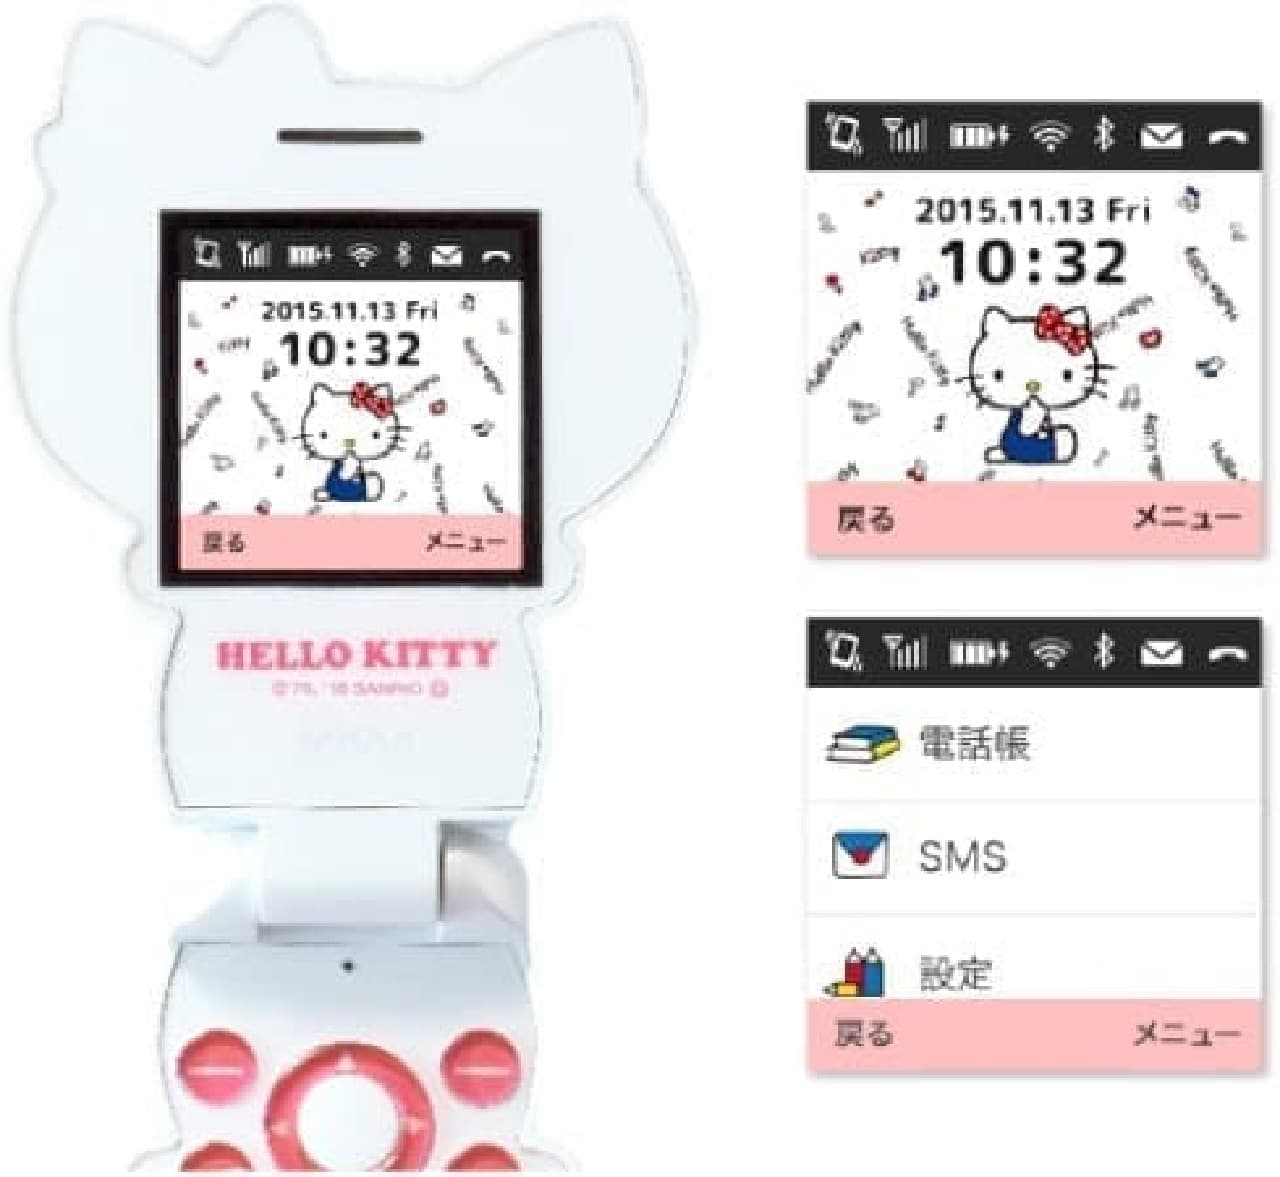 The nostalgic feature phone screen is also Kitty's color